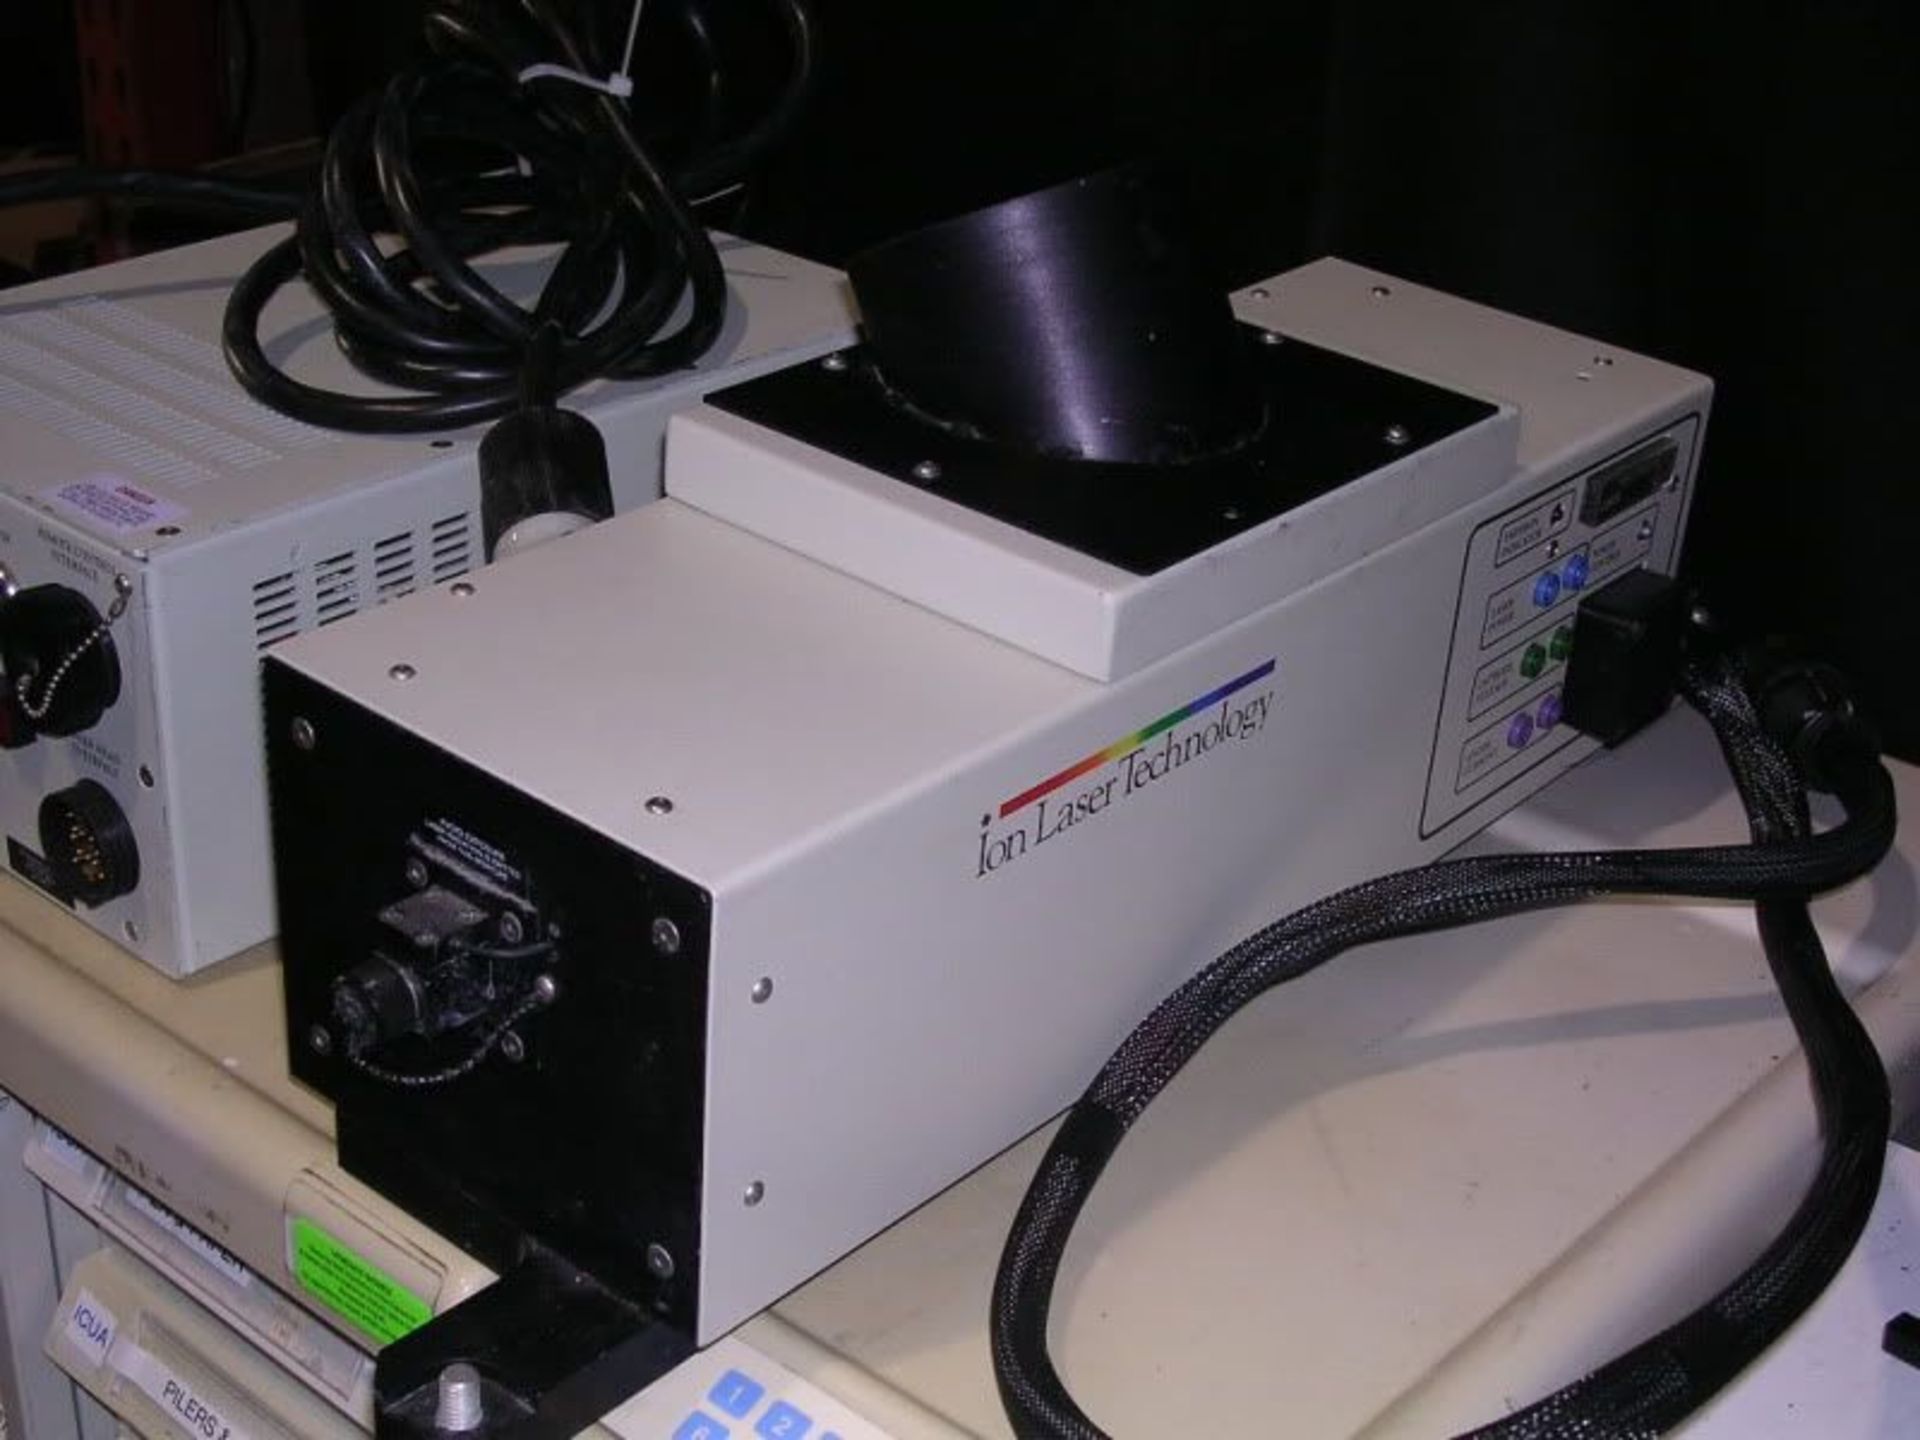 Ion Laser Technology 5500 Series Argon W/ Control Unit, Qty 1, 321462198421 - Image 4 of 8